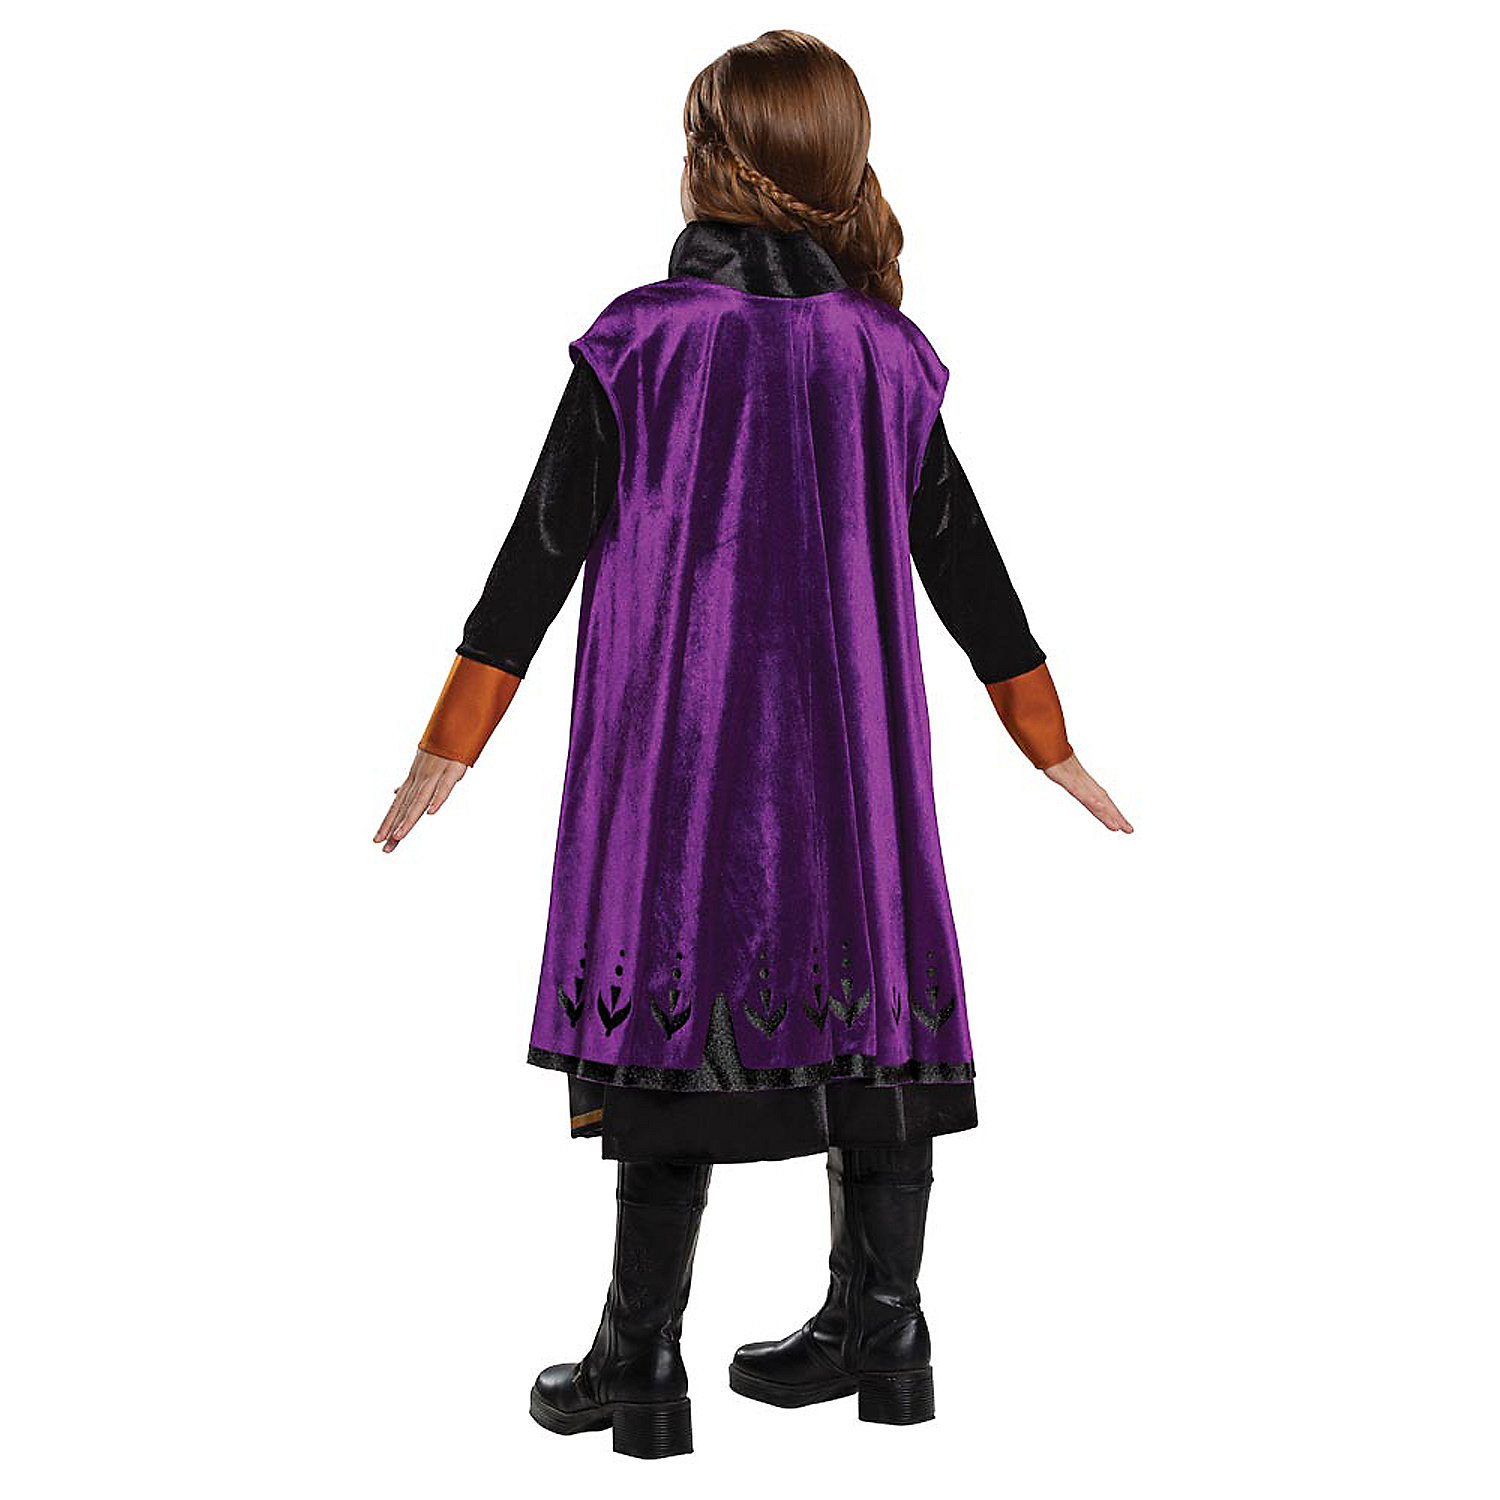 Disguise Toddler Girls' Disney's Frozen Anna Deluxe Costume - Size 3T-4T - image 3 of 3